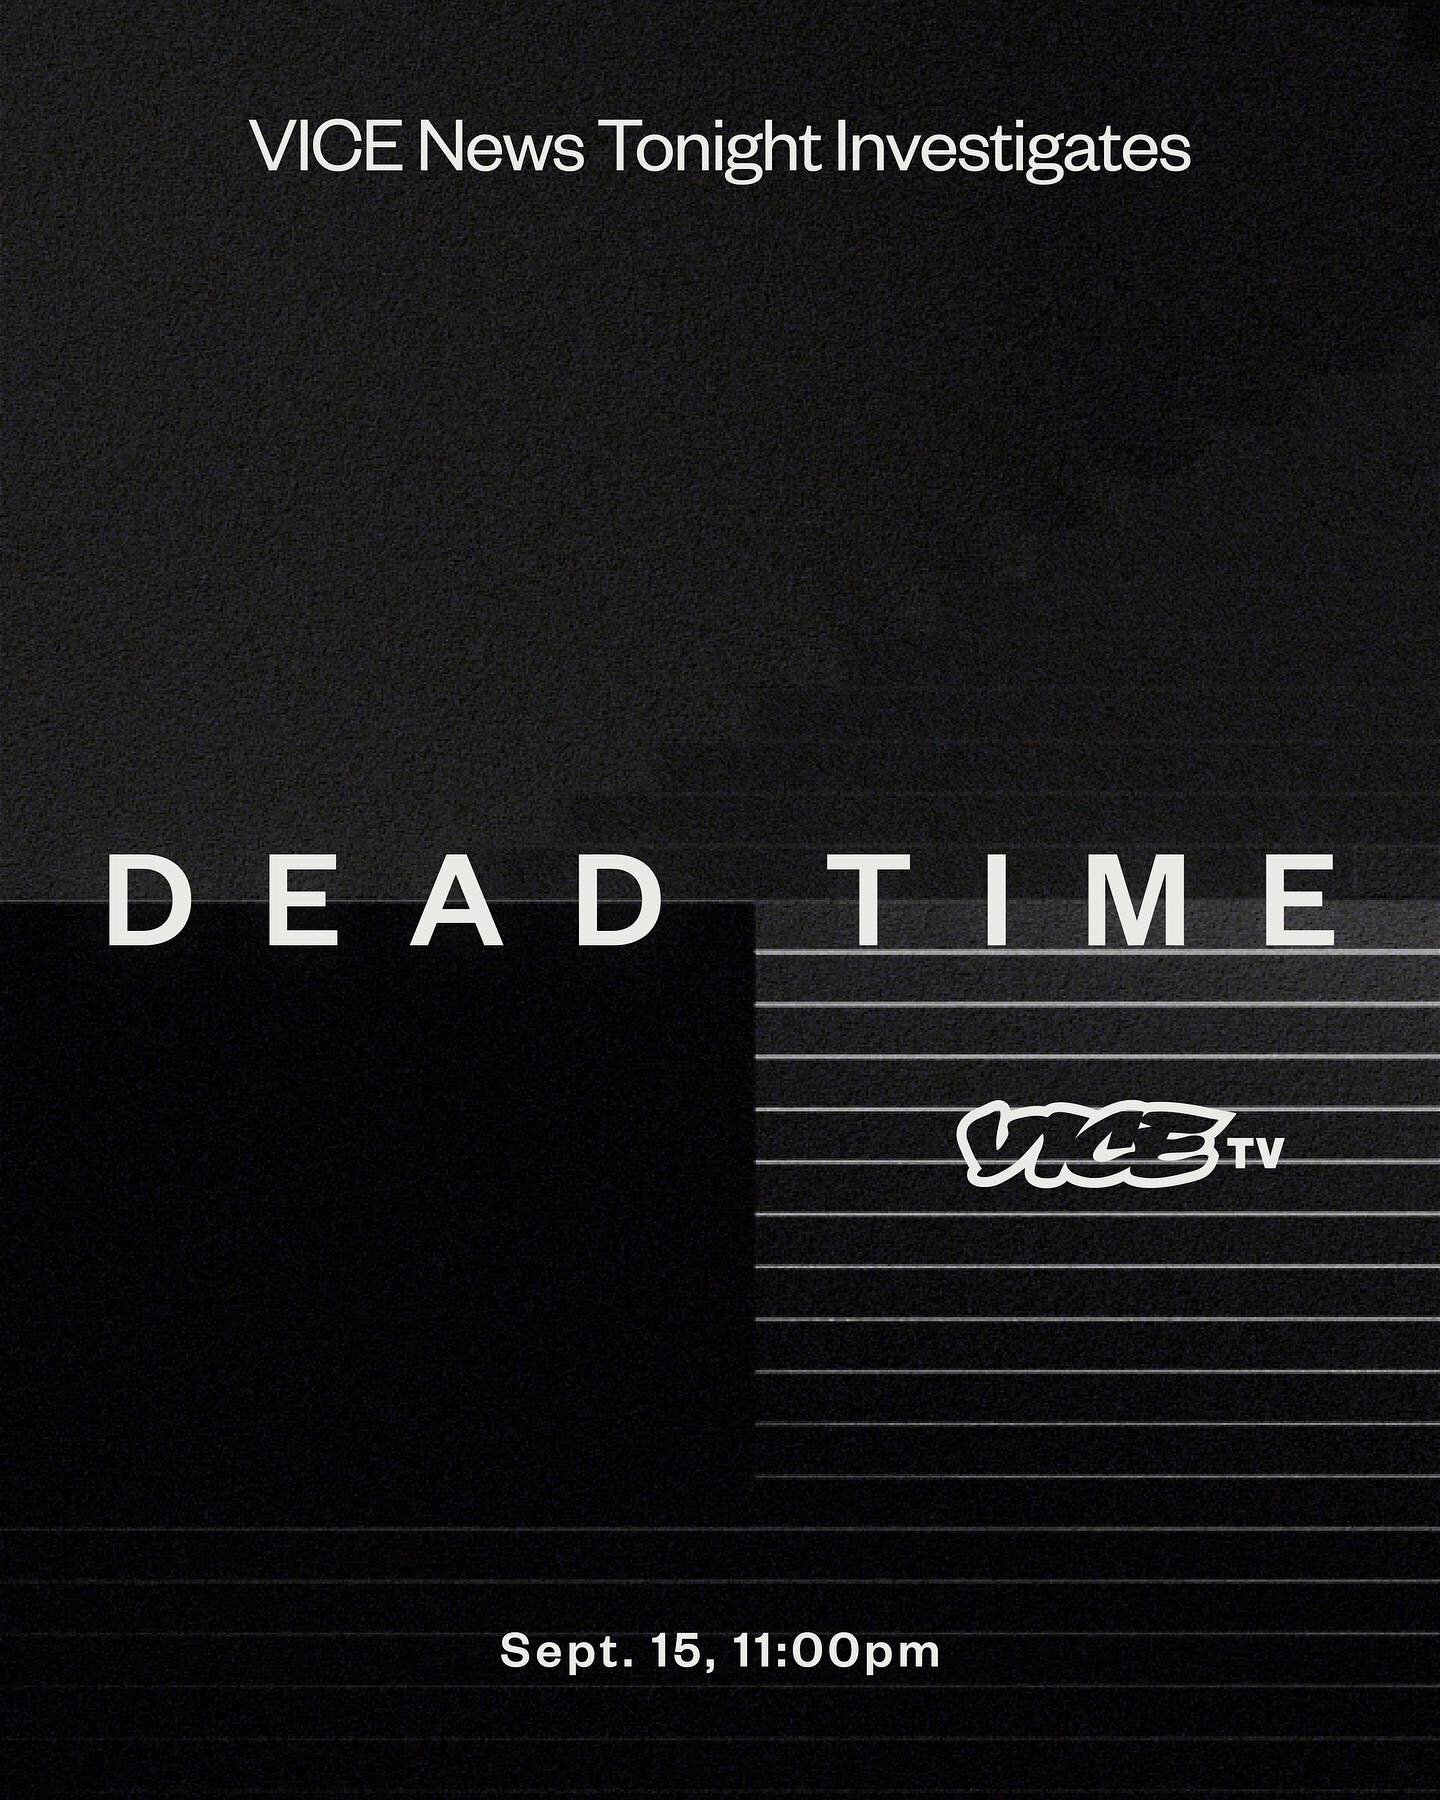 If you&rsquo;re hanging out tonight at 11p ET, please tune in to VICE News Tonight Investigates: Dead Time on @vice &mdash;Dead time is serving time in prison beyond your sentence &mdash; something that pretty much only happens if you&rsquo;re on the